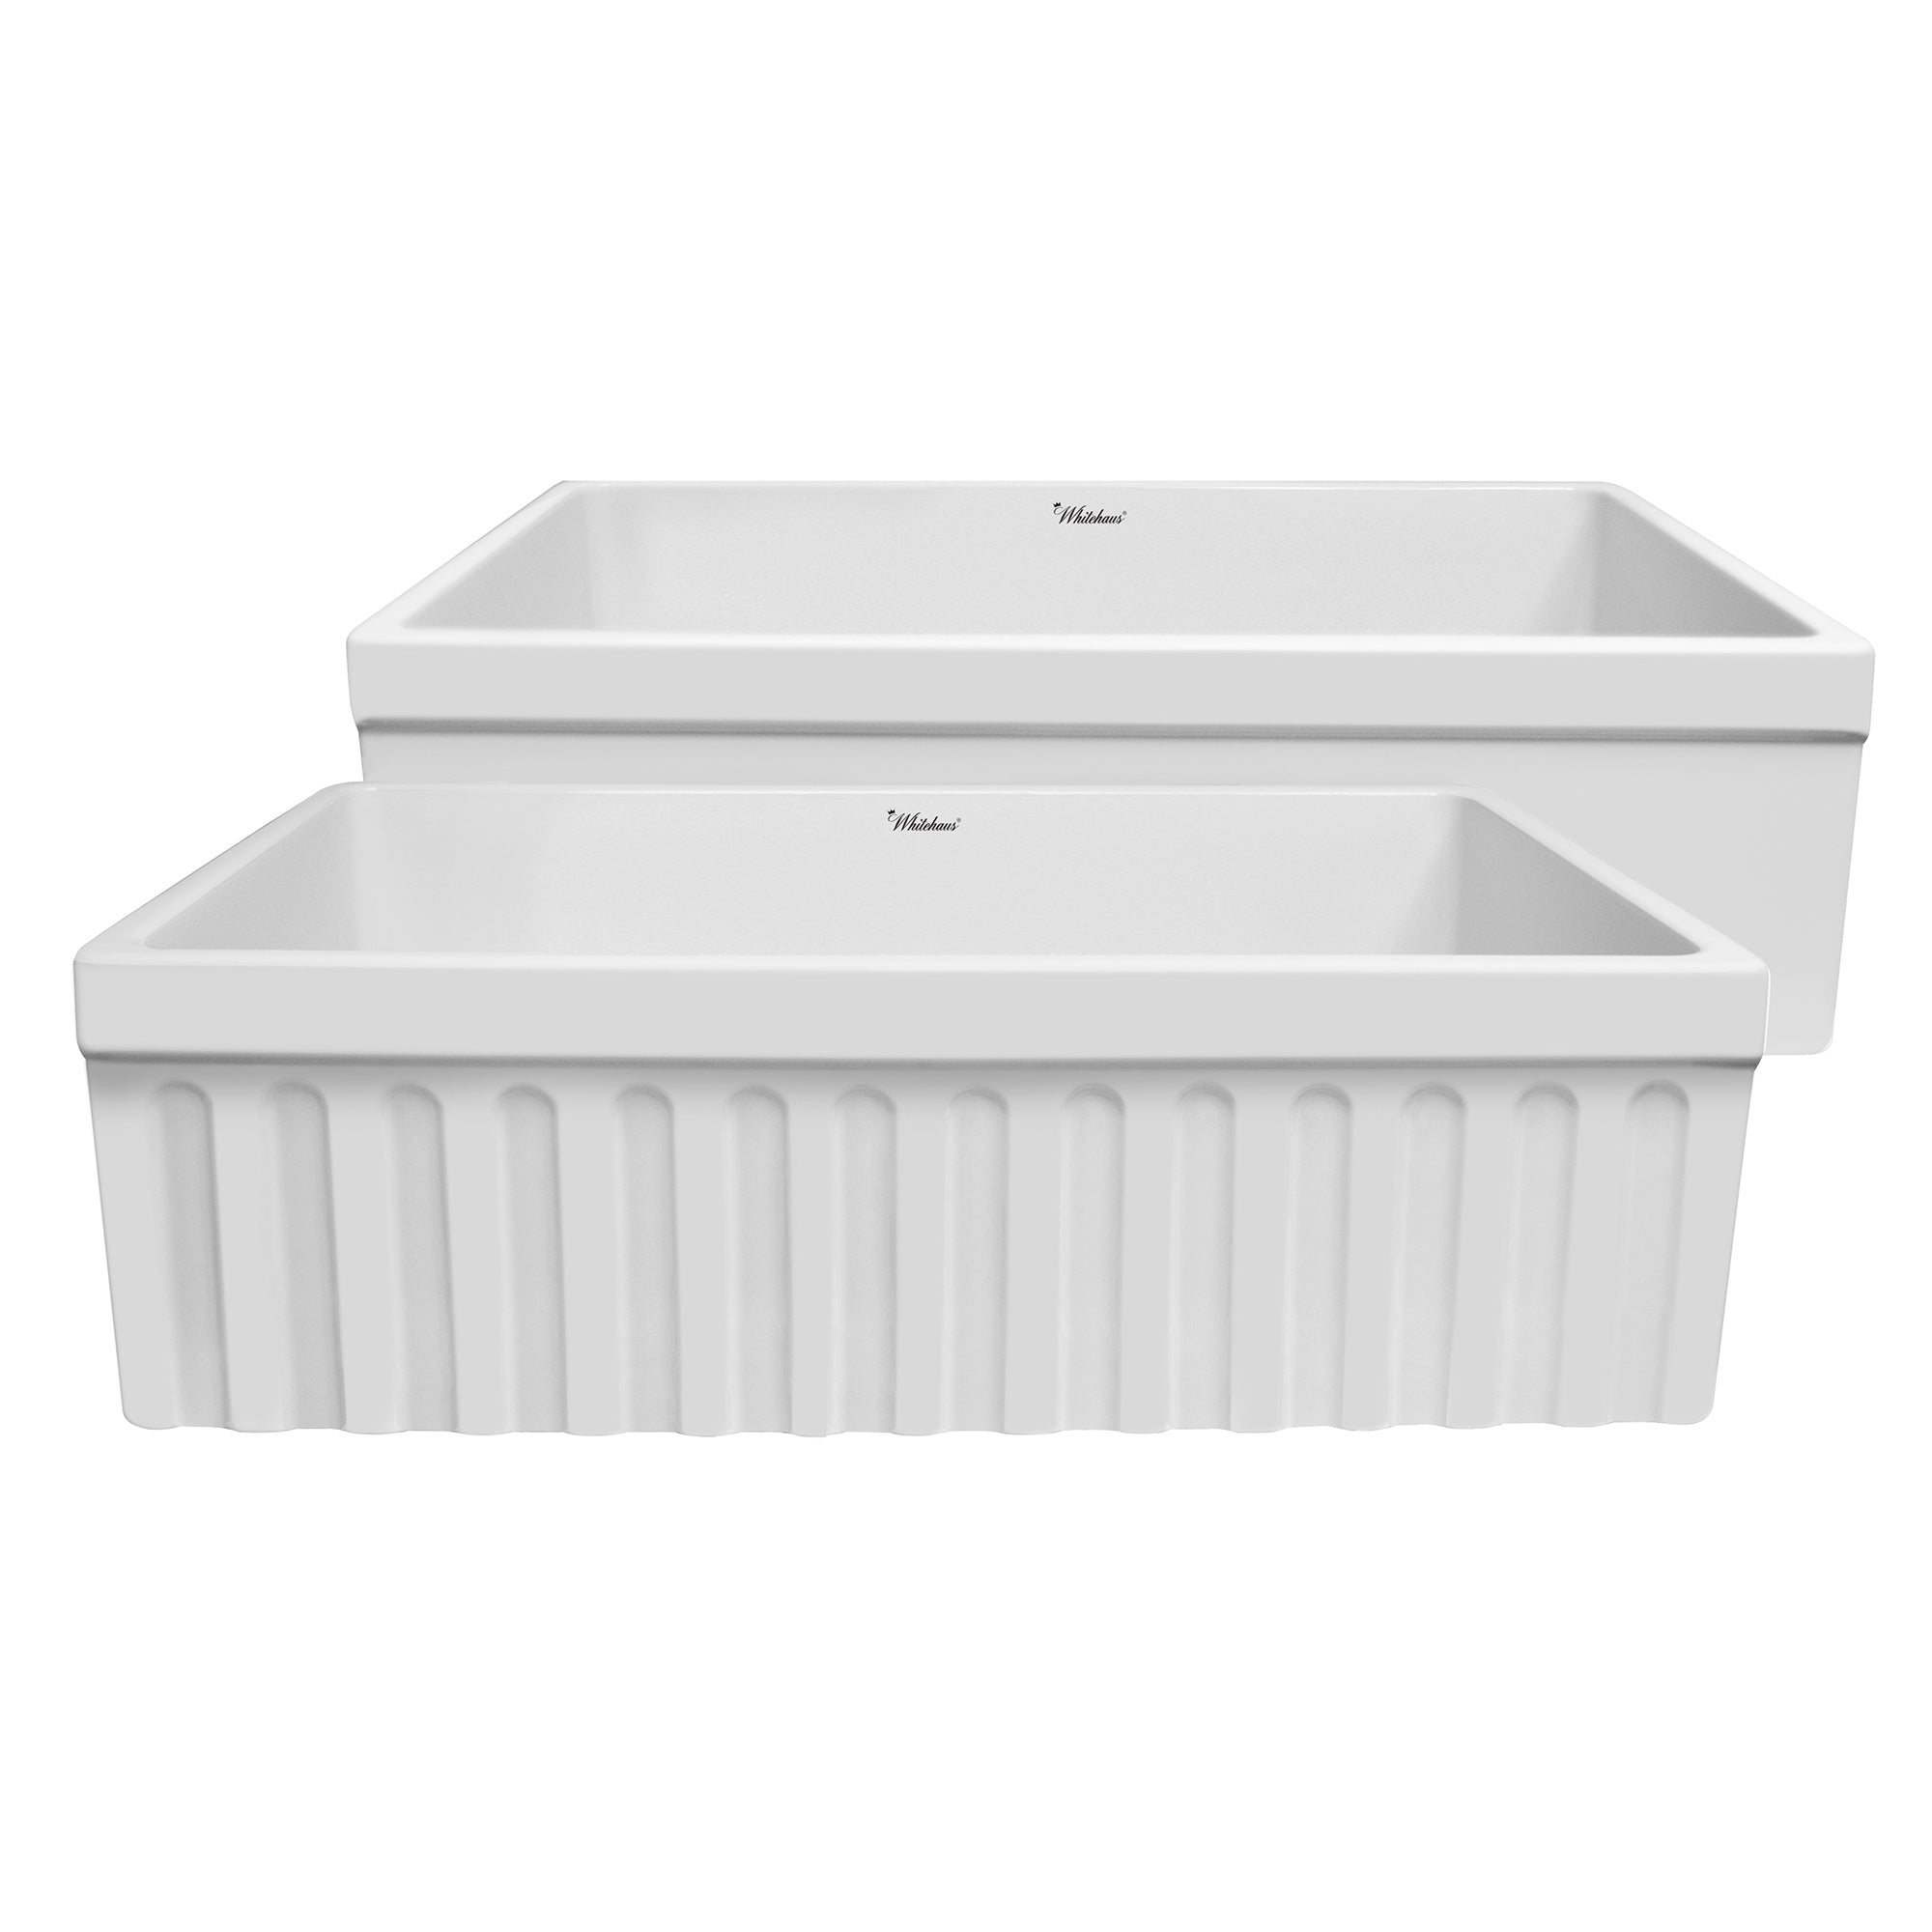 Quatro Alcove 30" Farmhaus Fireclay reversible Sink with a Fluted Front Apron